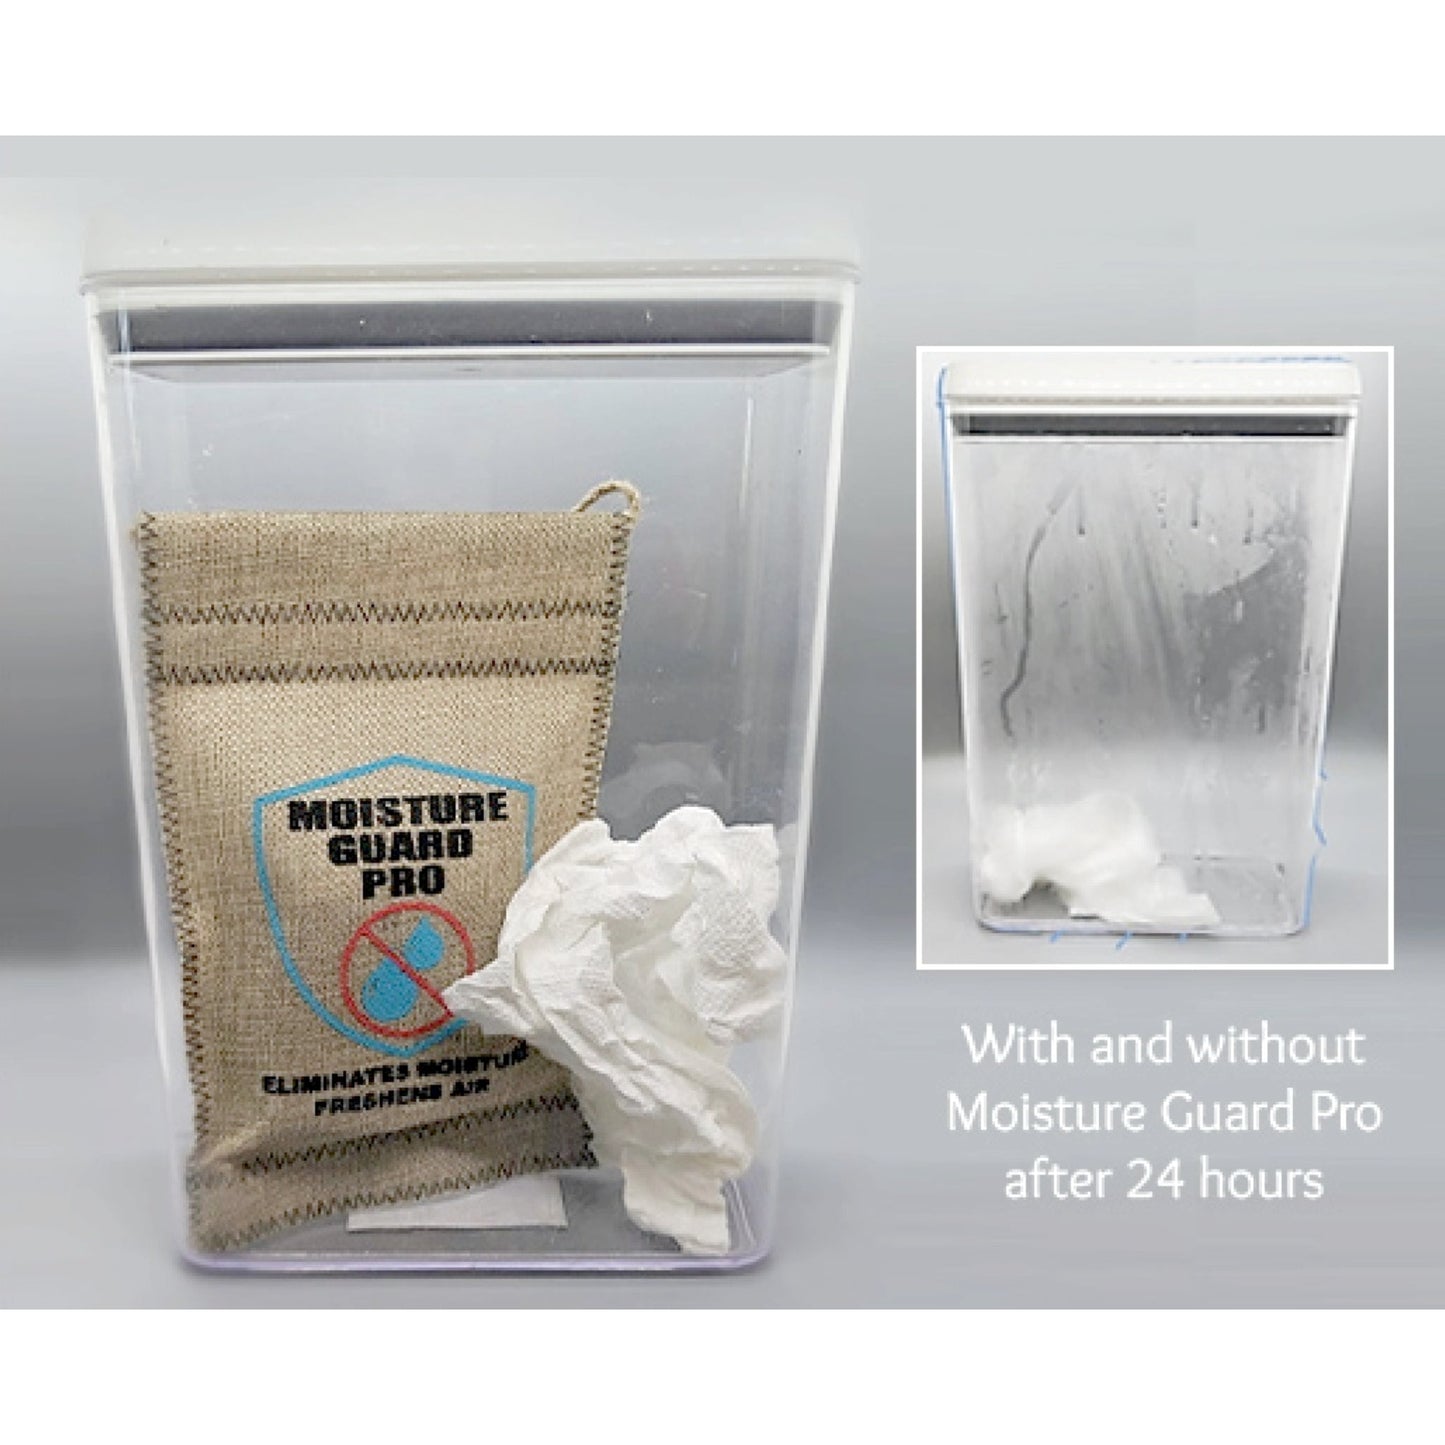 Moisture Guard Pro - Made in the USA